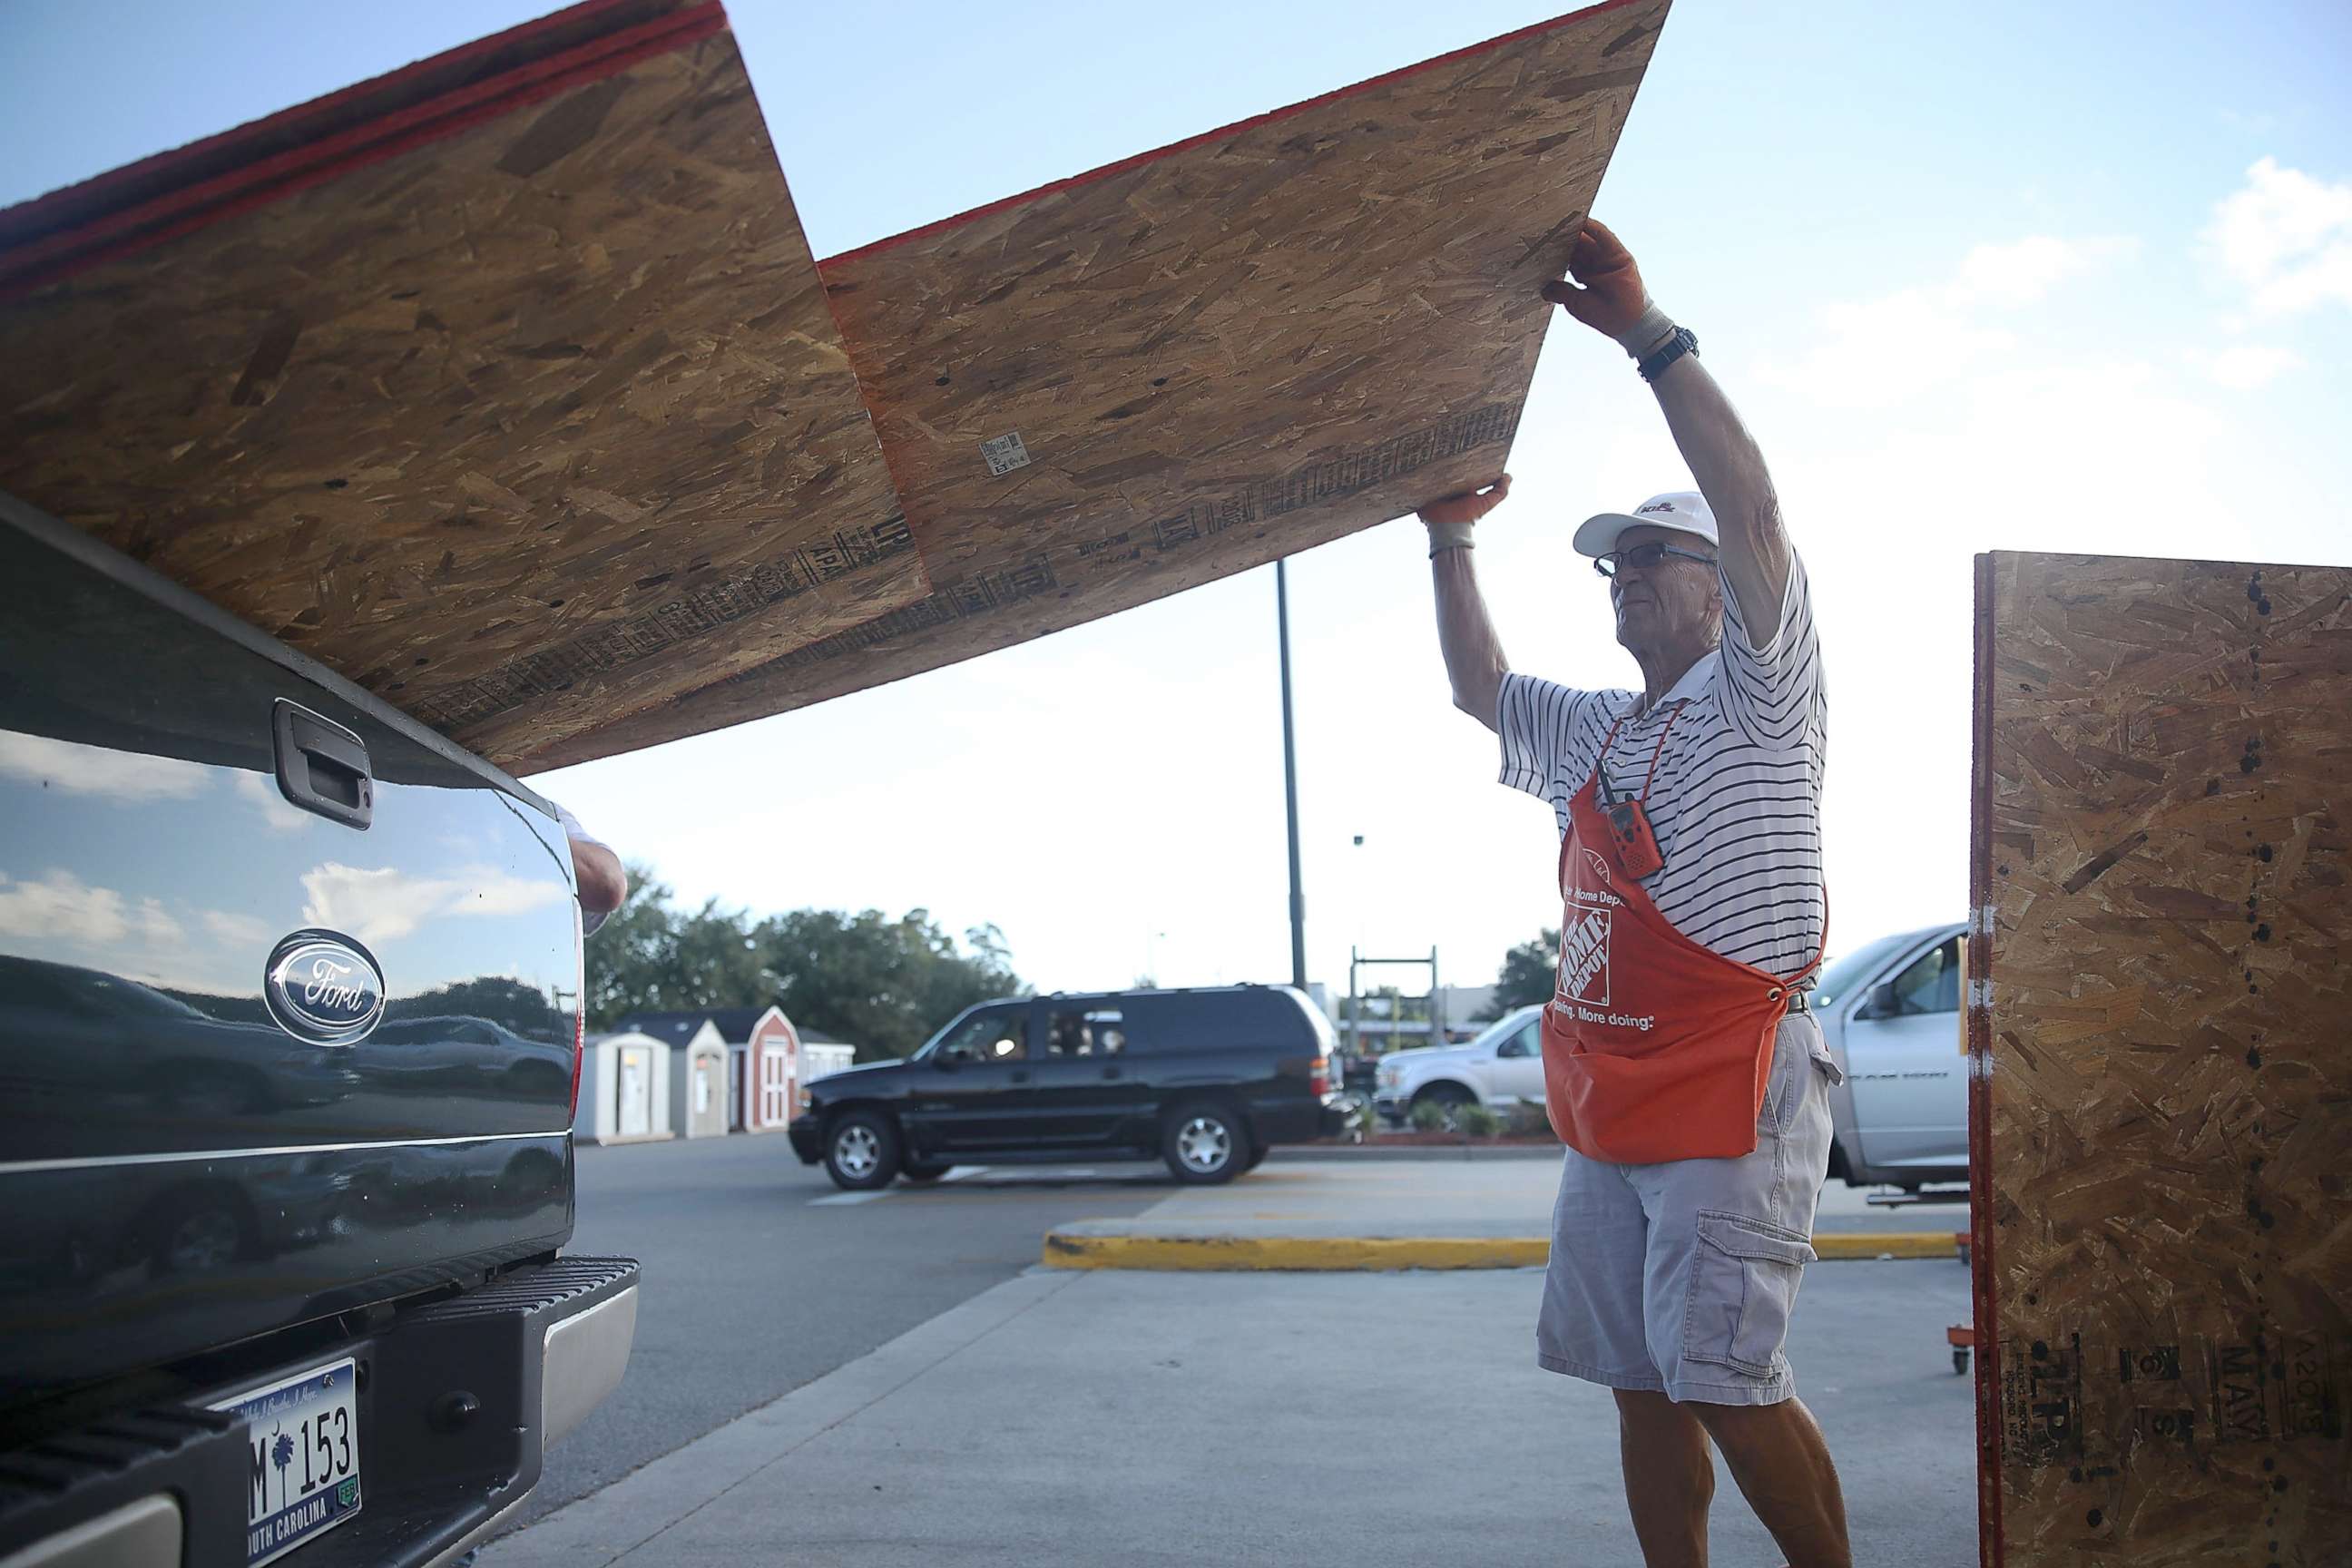 PHOTO: Home Depot employee Richard Balderson helps a customer load plywood into his truck as residents prepare for the arrival of Hurricane Florence, Sept. 11, 2018, in Myrtle Beach, S.C.